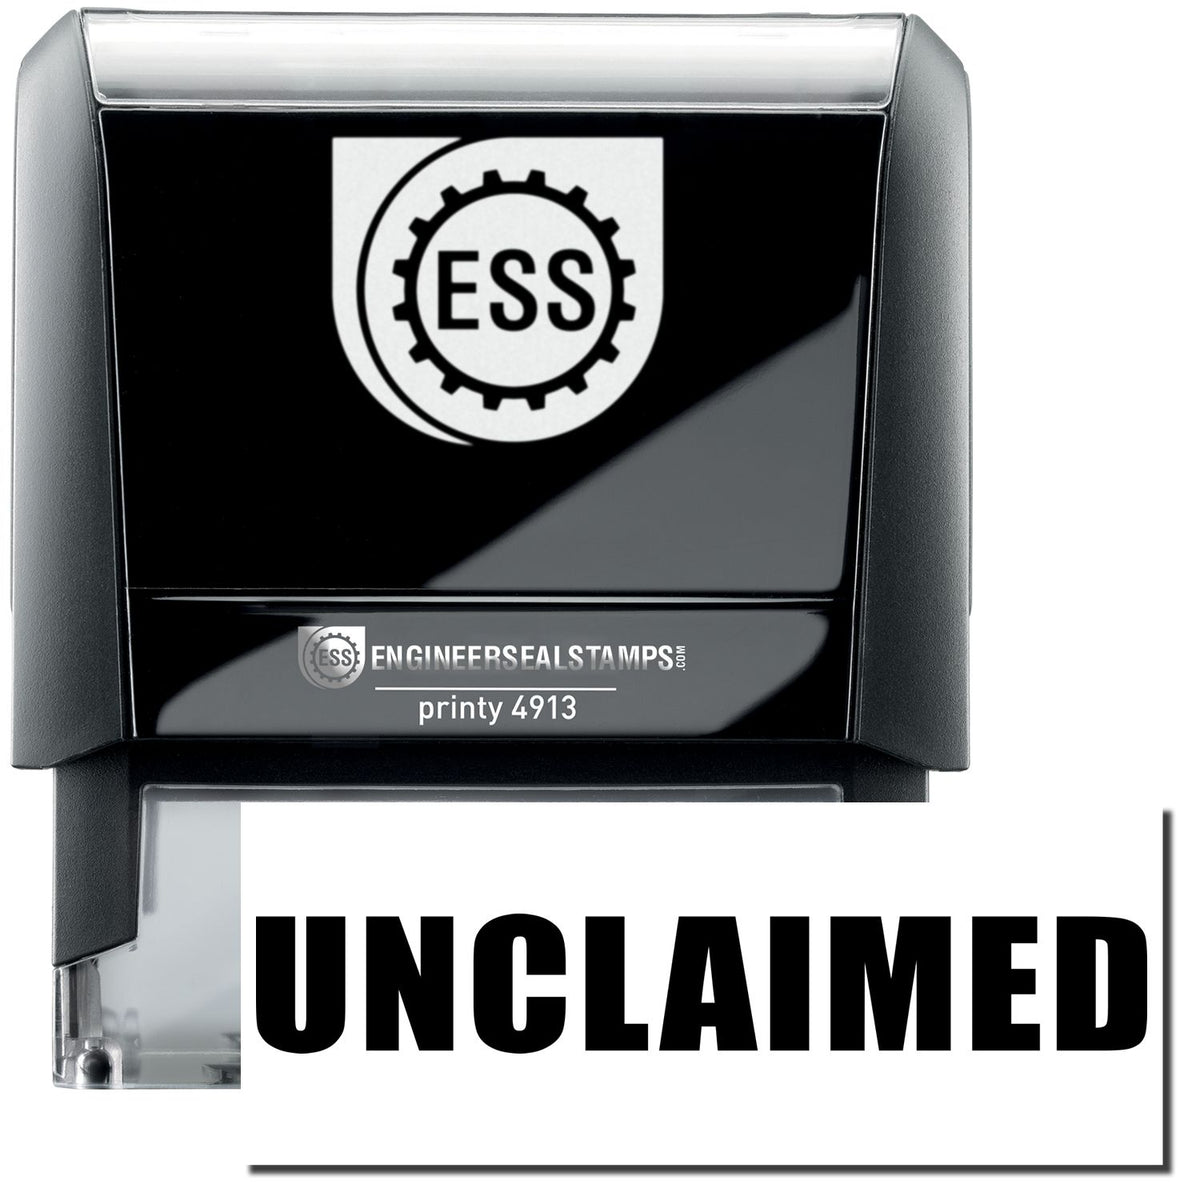 A self-inking stamp with a stamped image showing how the text &quot;UNCLAIMED&quot; in a large font is displayed by it after stamping.